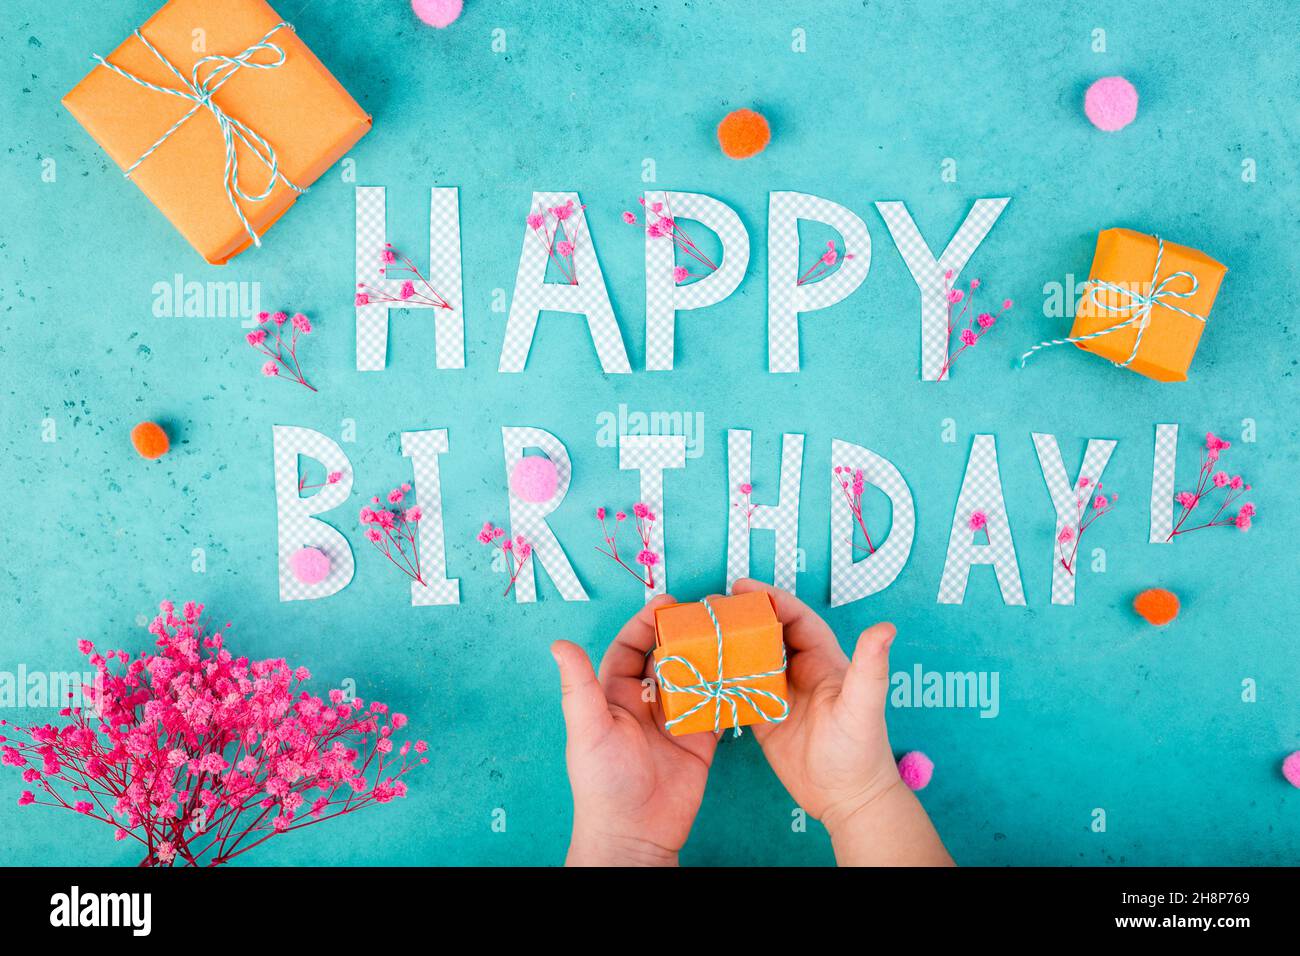 Happy birthday background with letters, orange gifts, pink flowers child hands on turquoise blue background Stock Photo